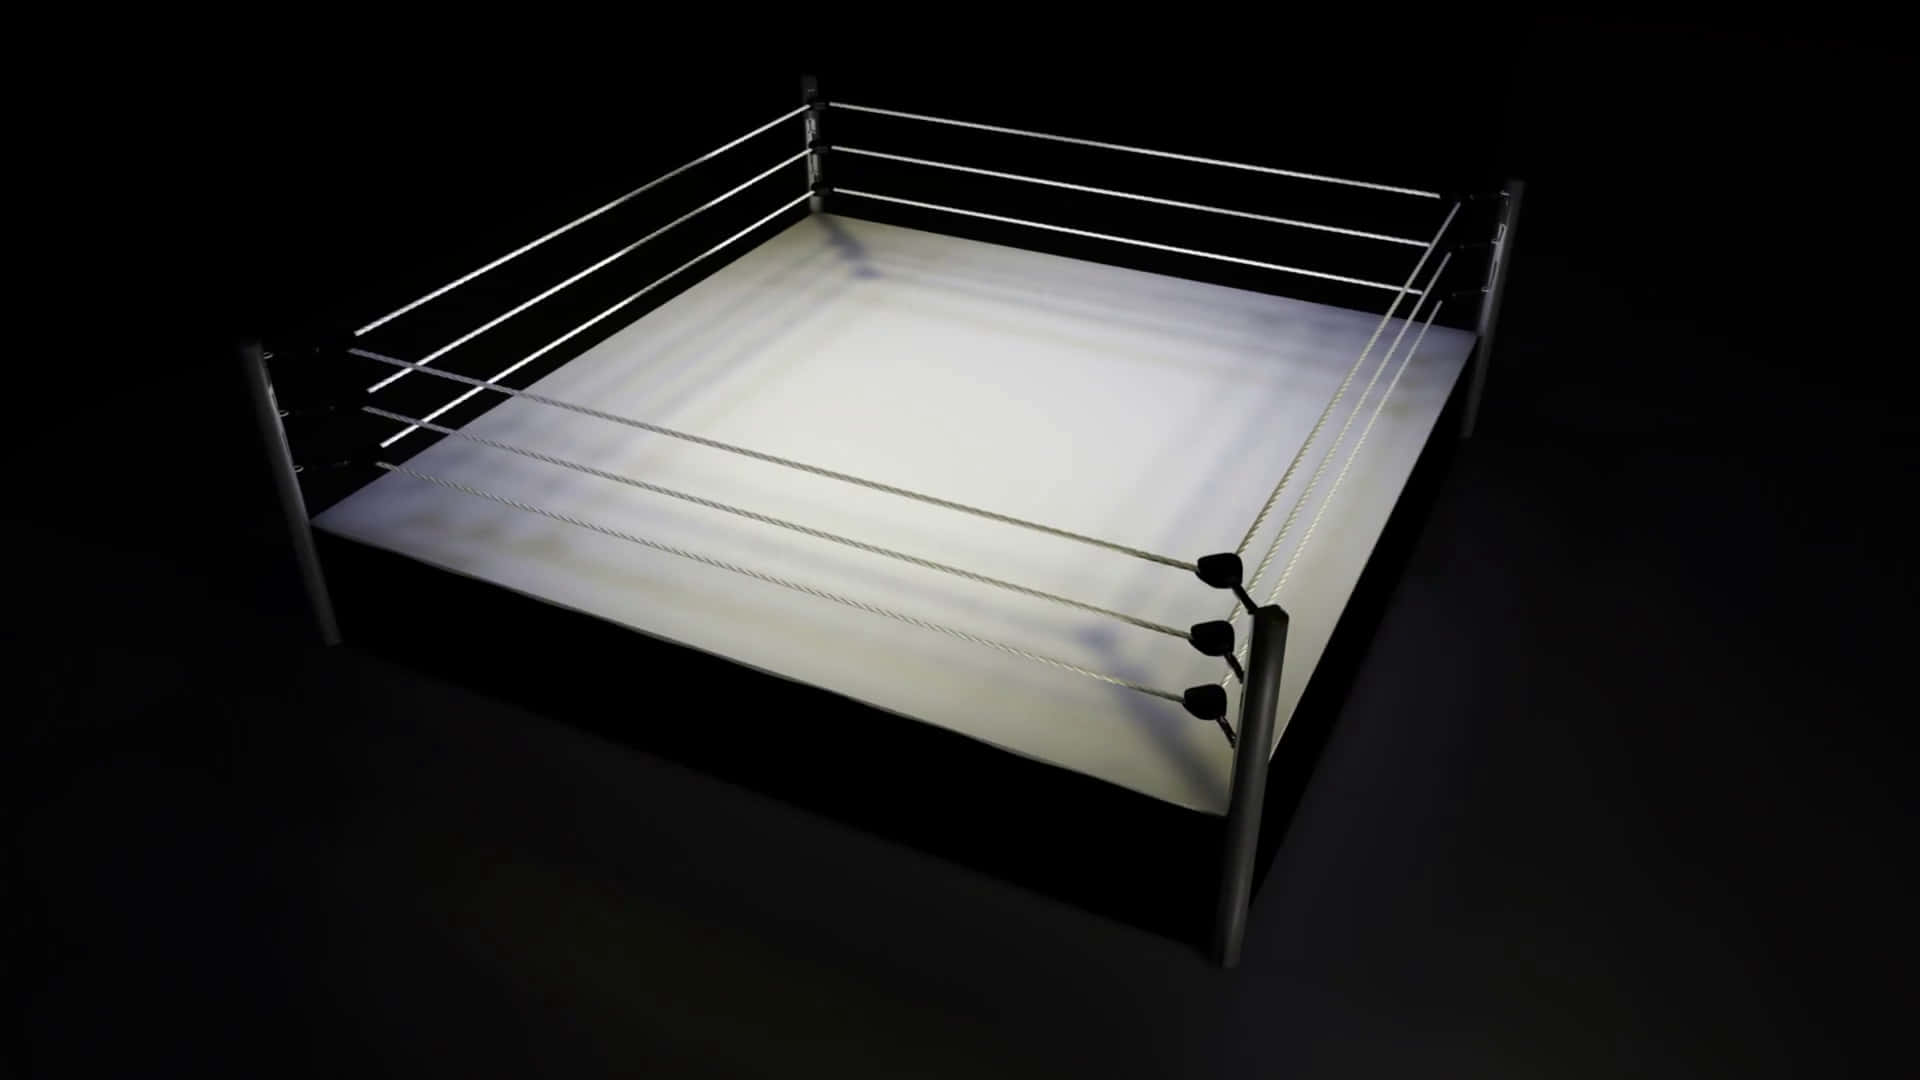 Spectacular View of a Wrestling Ring